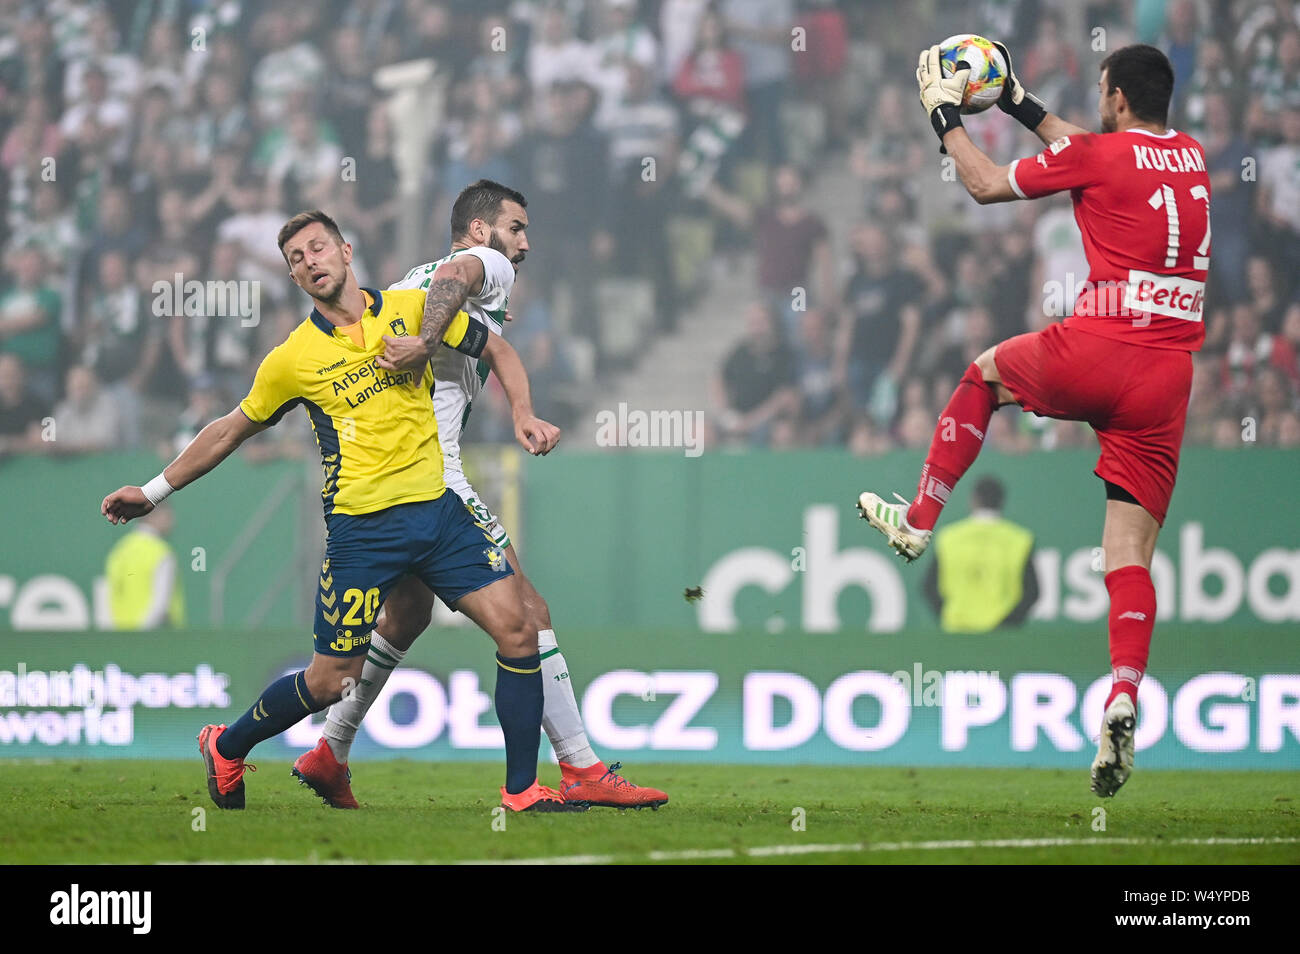 Kamil Wilczek from Brondby IF (L) Blazej Augustyn from Lechia Gdansk (C) and Dusan Kuciak from Lechia Gdansk (R) are seen in action during the UEFA Europa League Qualifiers match between Lechia Gdansk and Brondby IF at Energa Stadium.(Final score; Lechia Gdansk 2:1 Brondby IF) Stock Photo